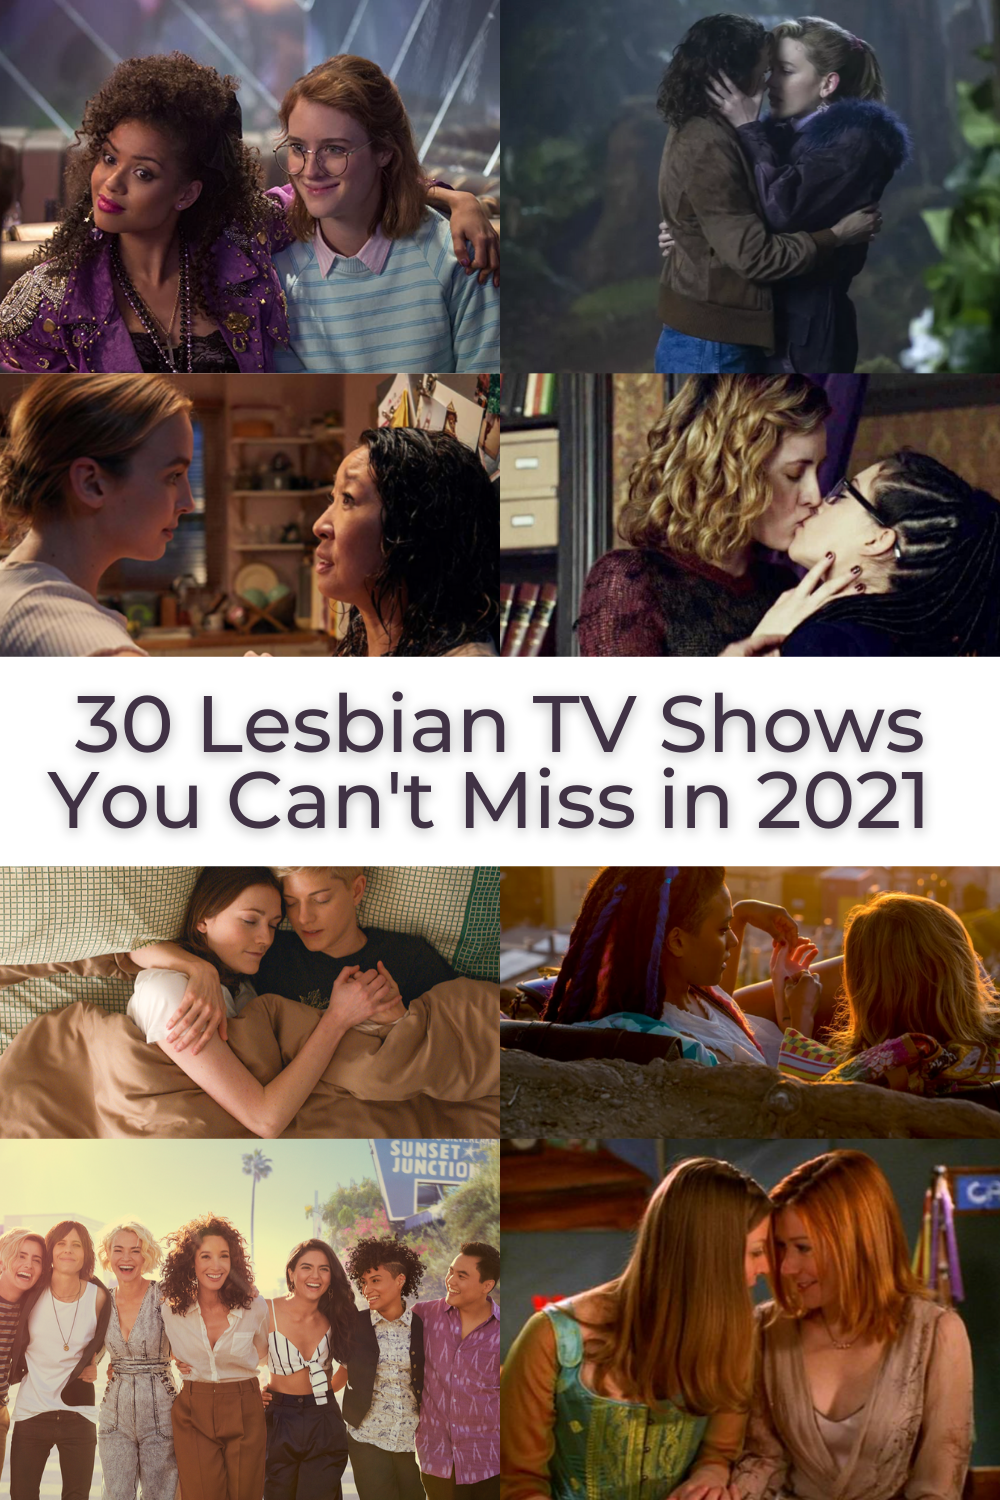 30 Best and Lesbian TV Shows in 2021